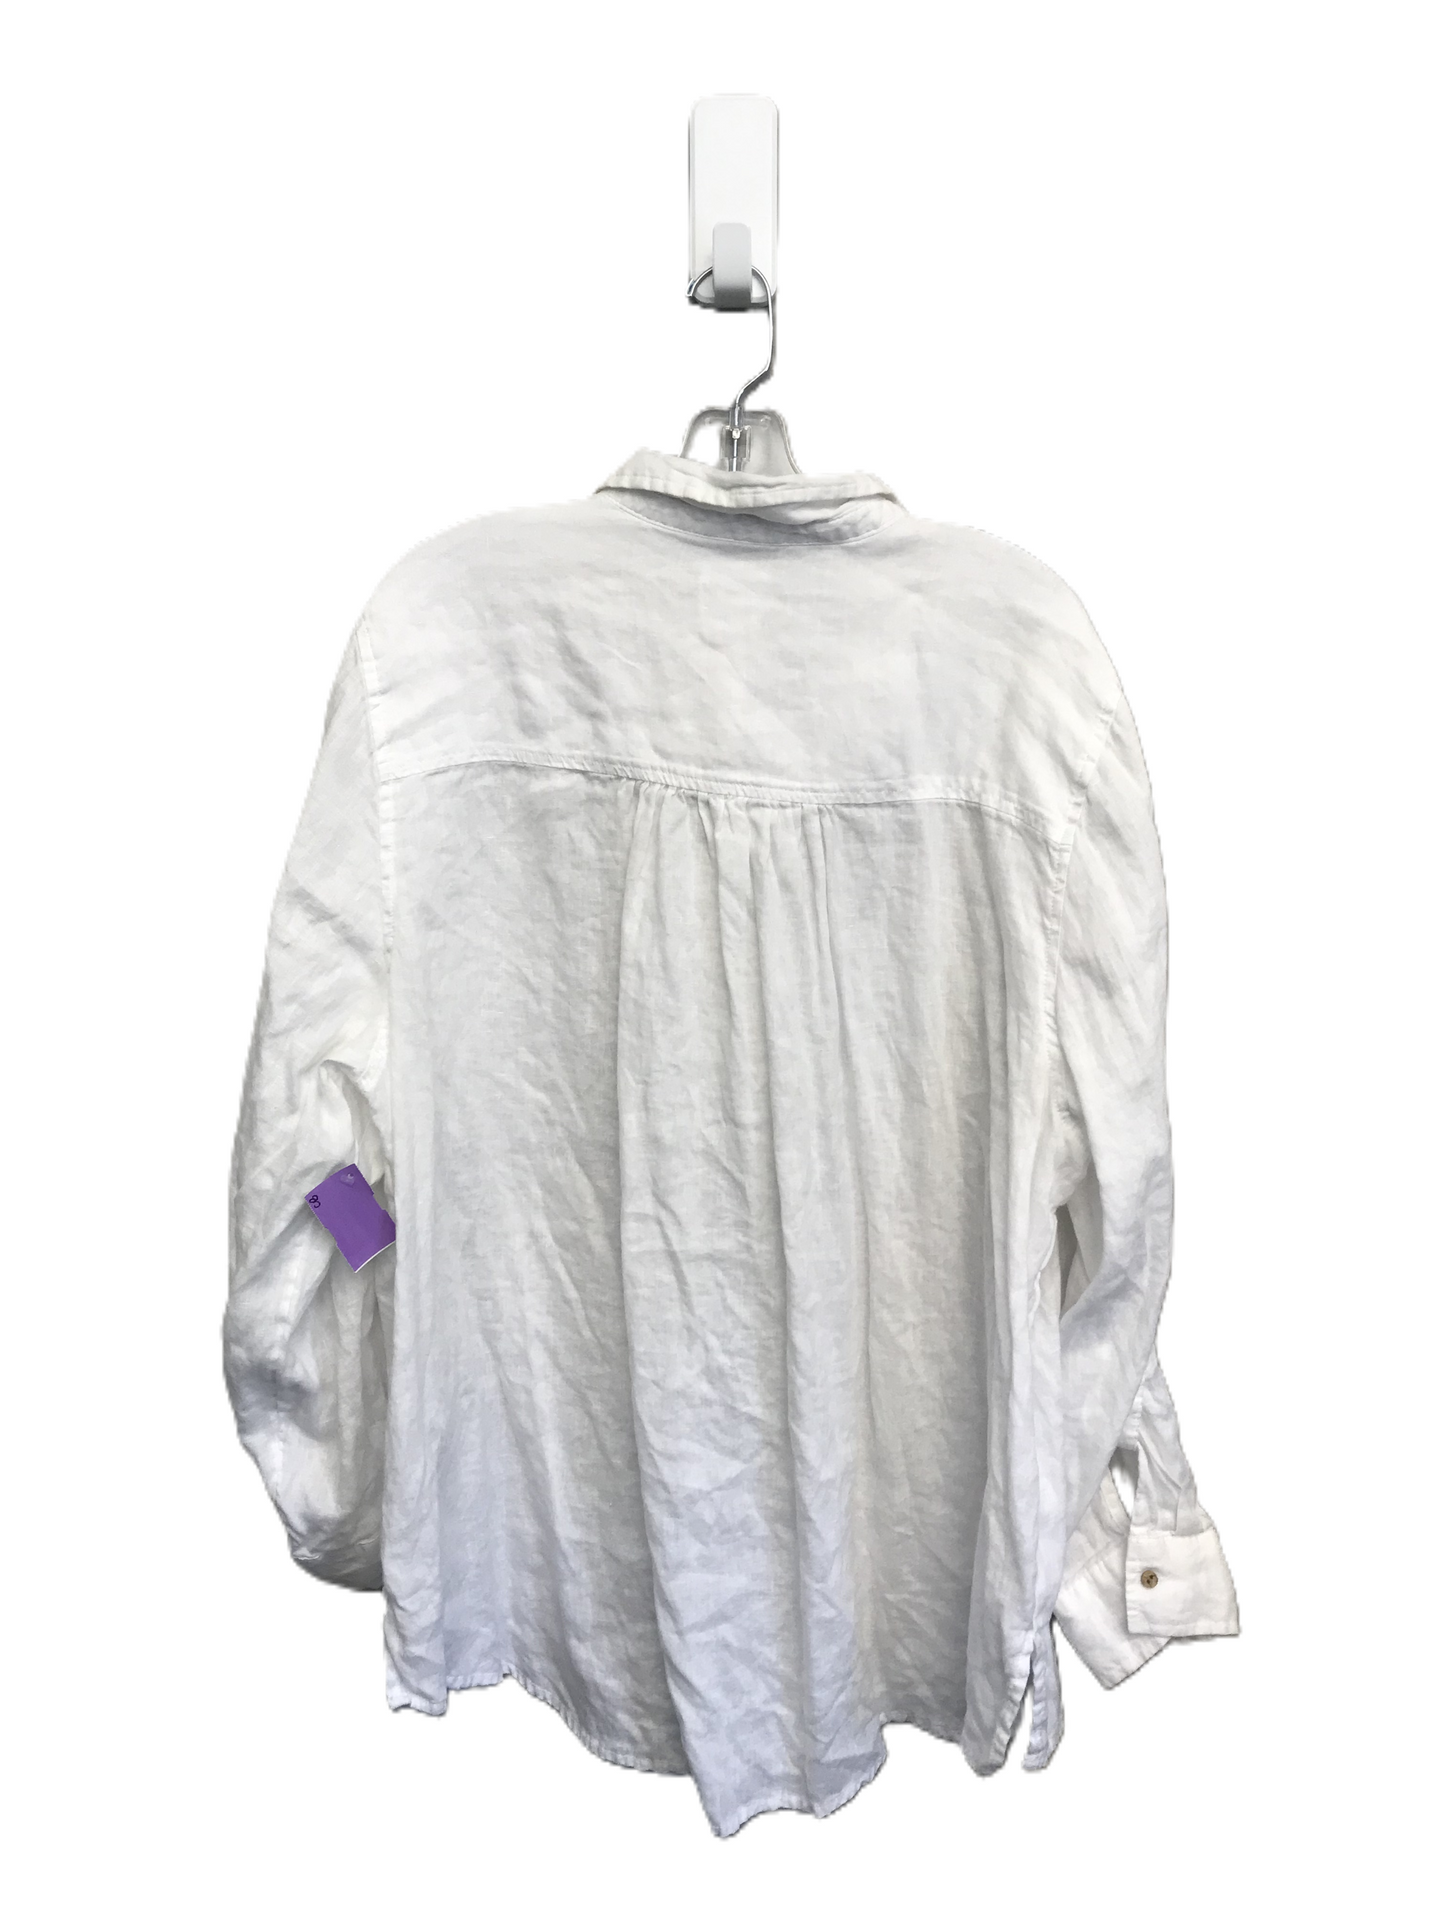 White Top Long Sleeve By Sigrid Olsen, Size: 3x